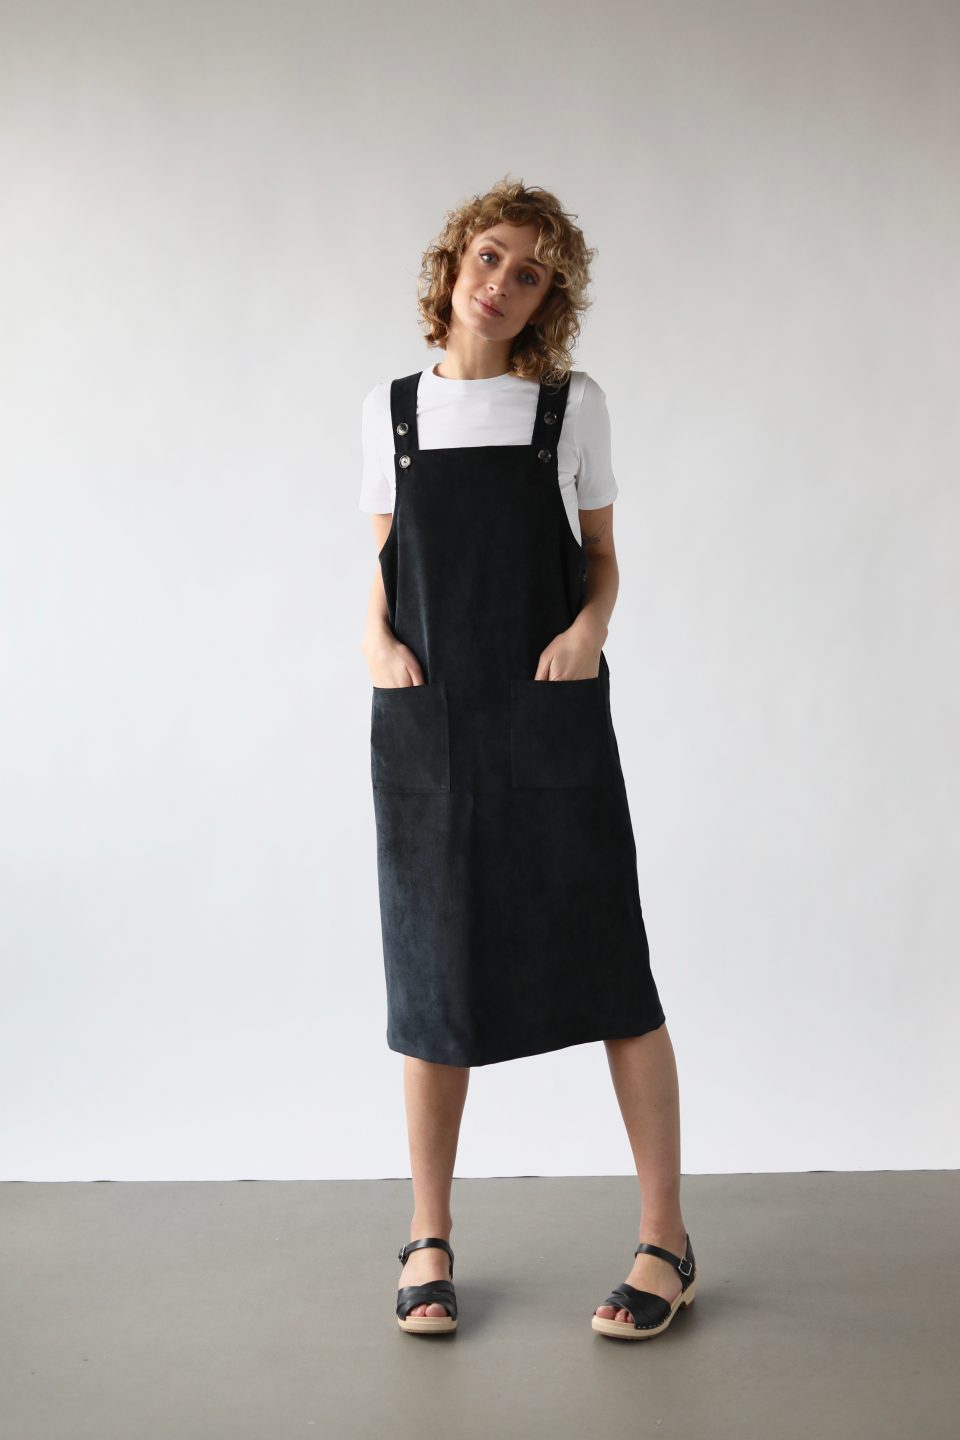 Velvet pinafore dress in black | Dress | Sustainable clothing | OffOn clothing